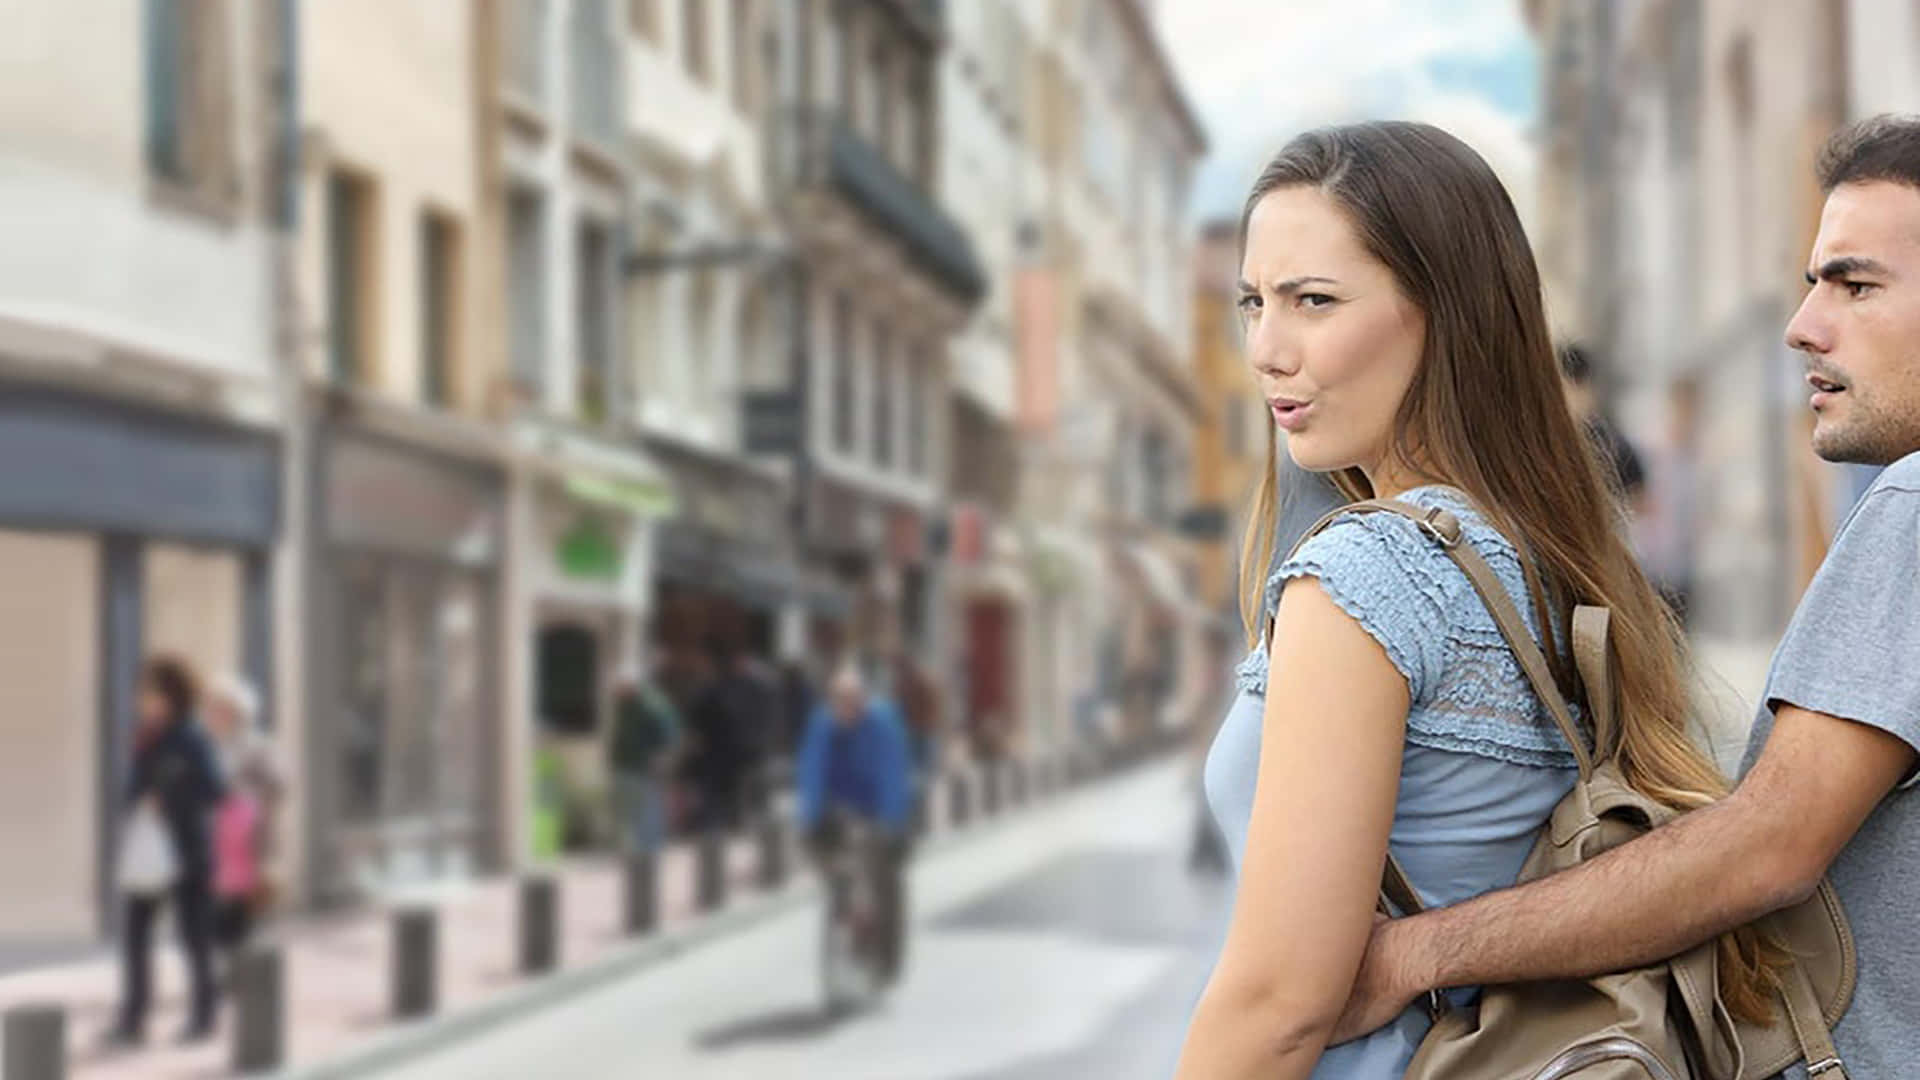 Download A Man And Woman Standing On A Street | Wallpapers.com